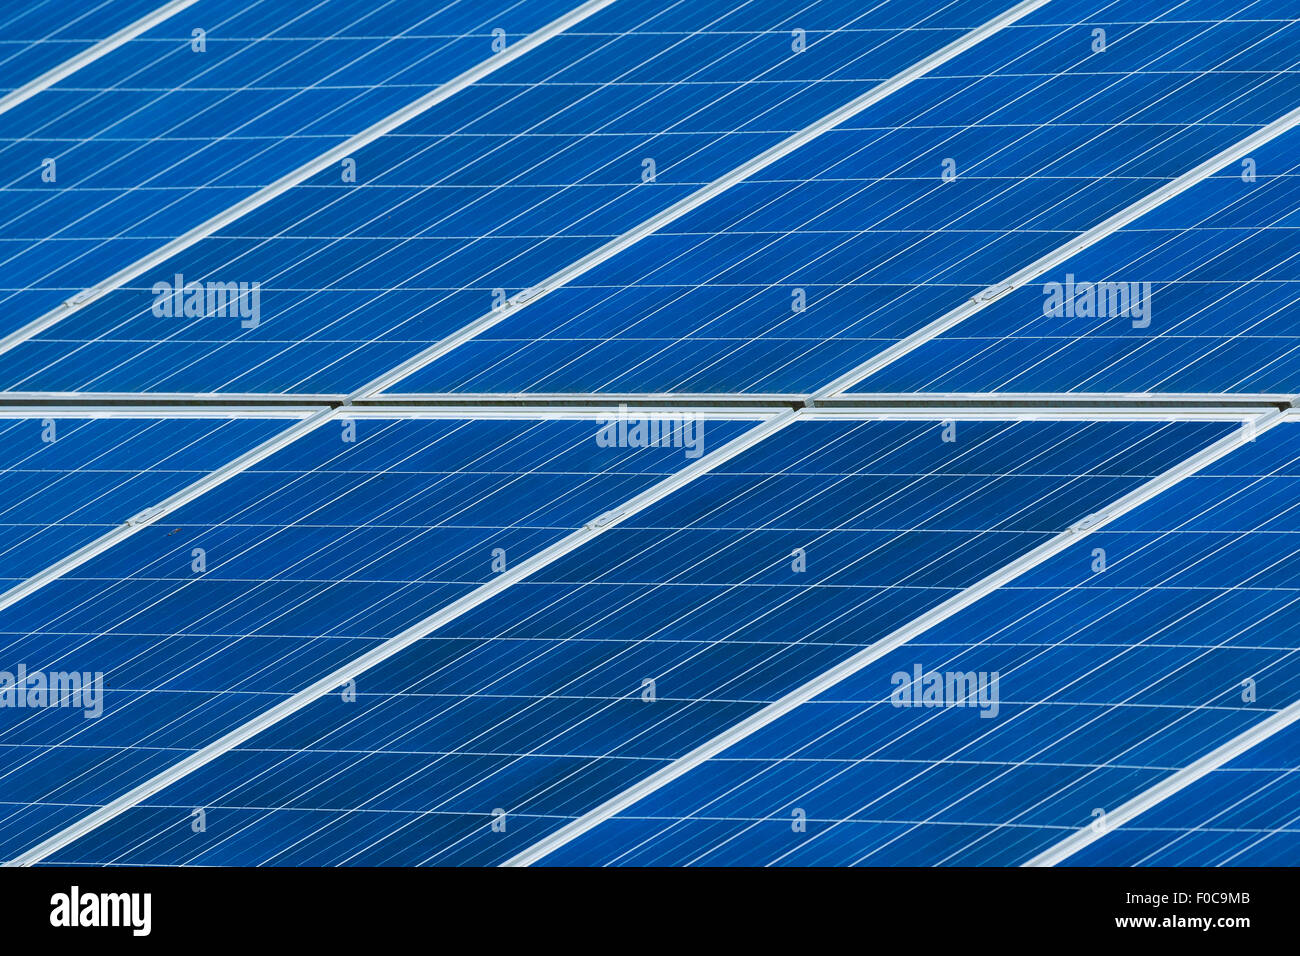 Solar panels grid on roof generating electricity close up. Sustainable green energy. Stock Photo